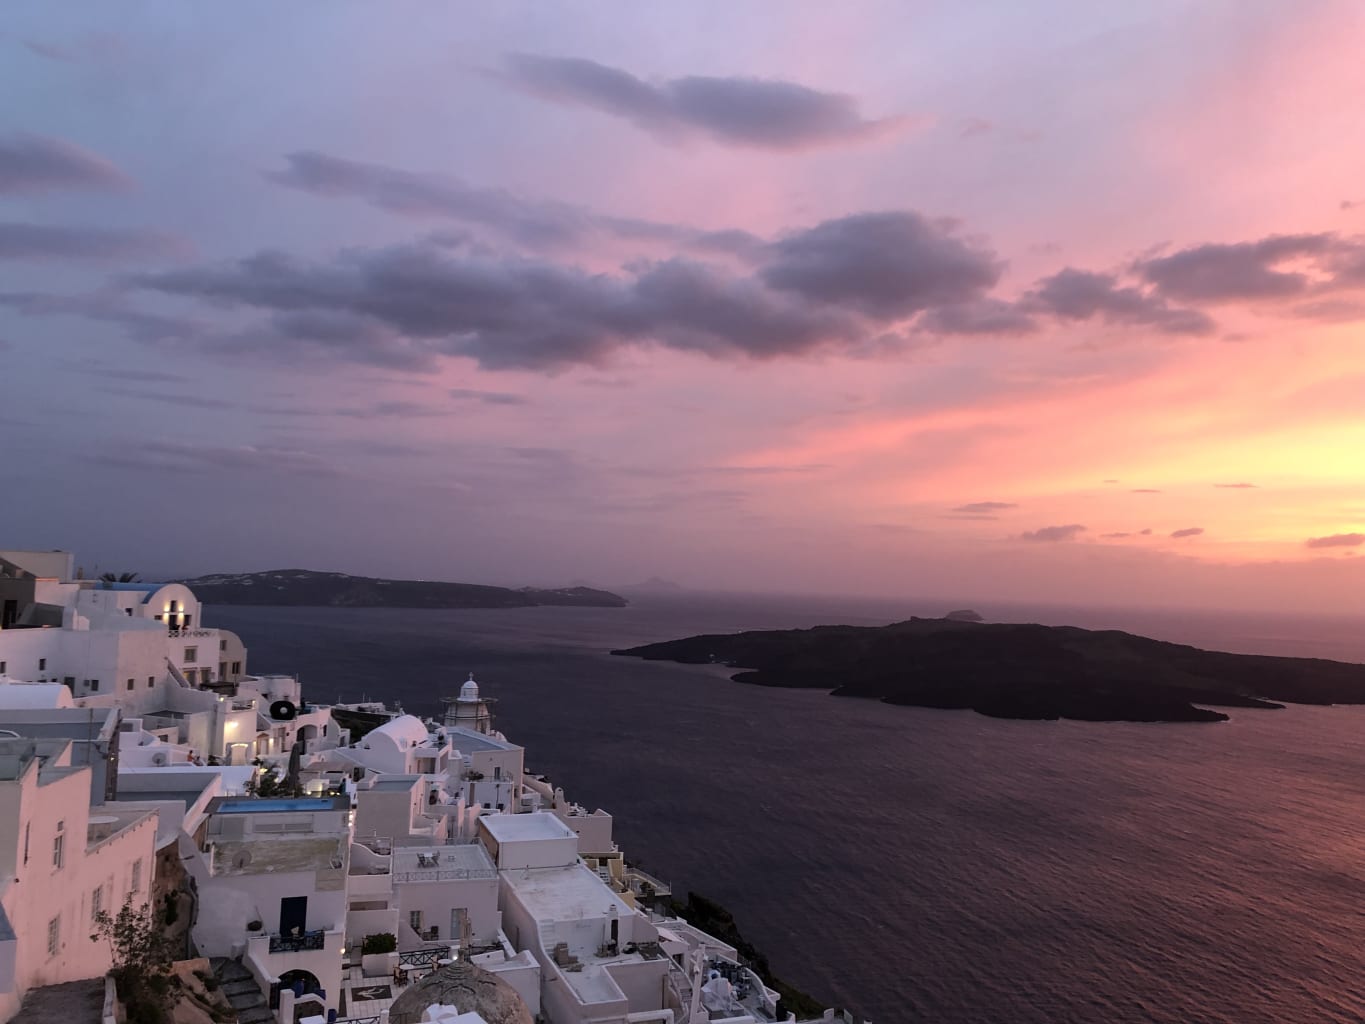 A view of a sunset over the ocean in front of a city in Greece.